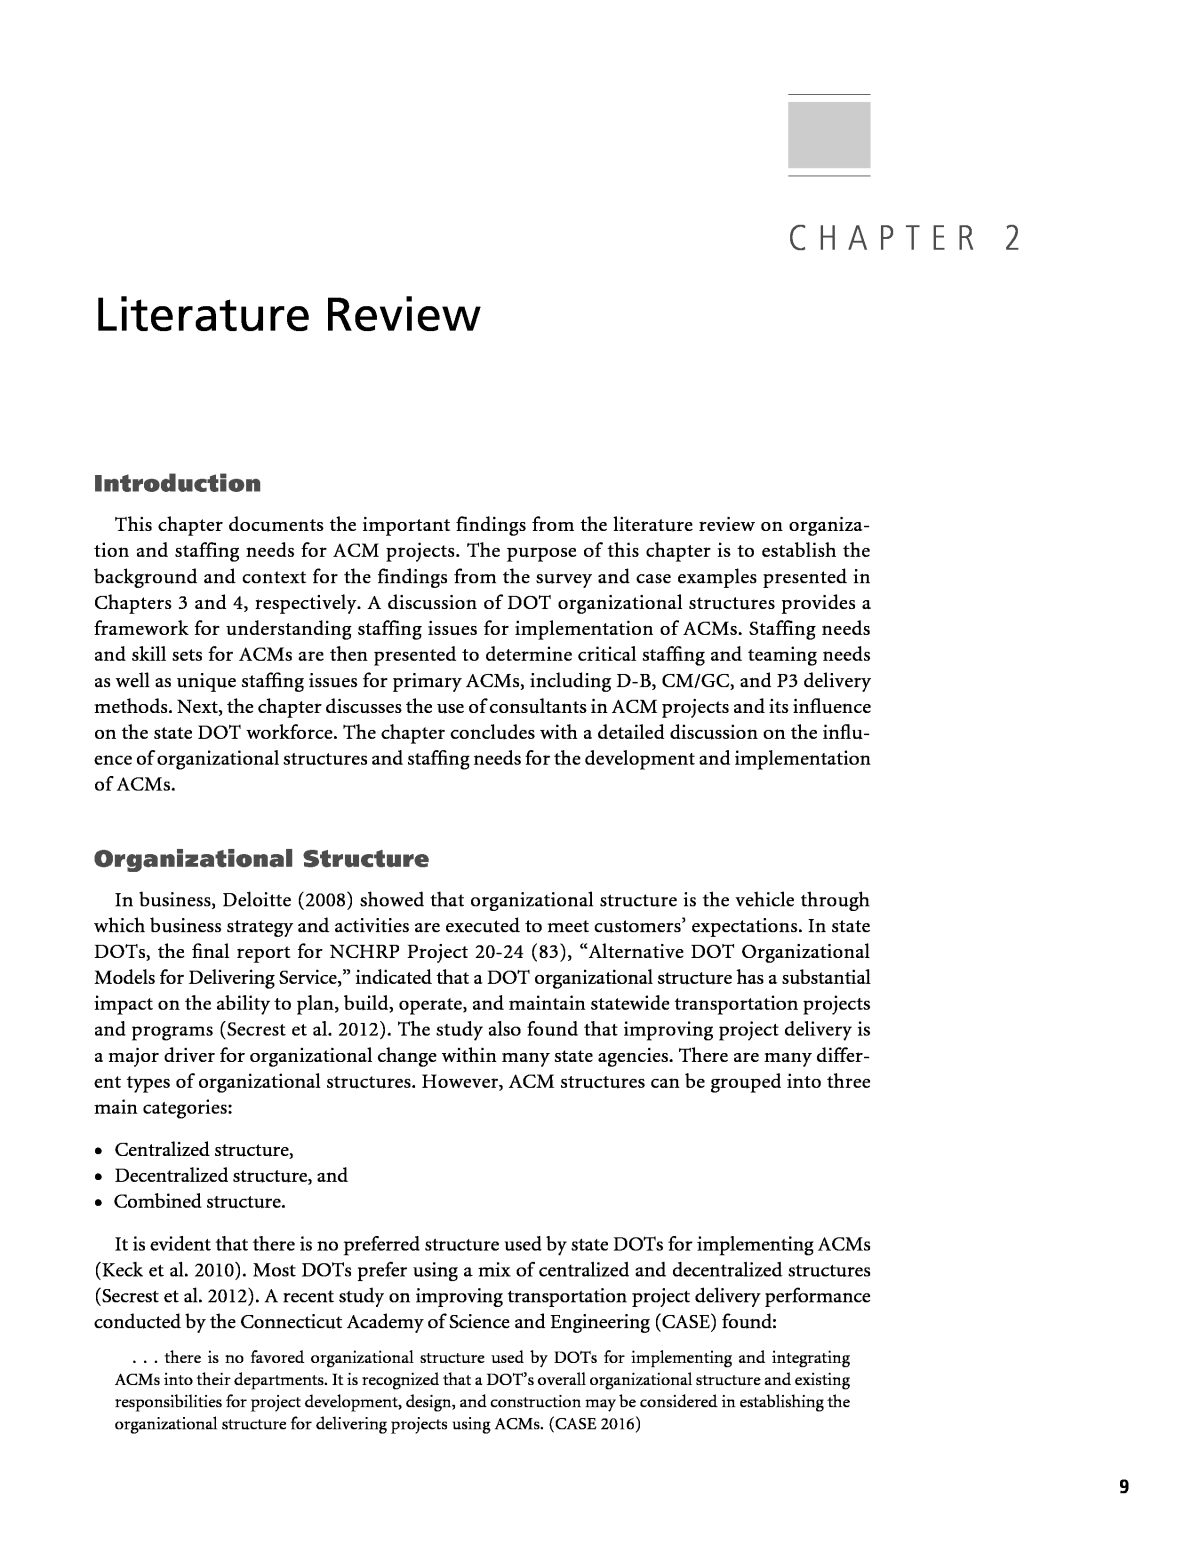 chapter 2 of literature review